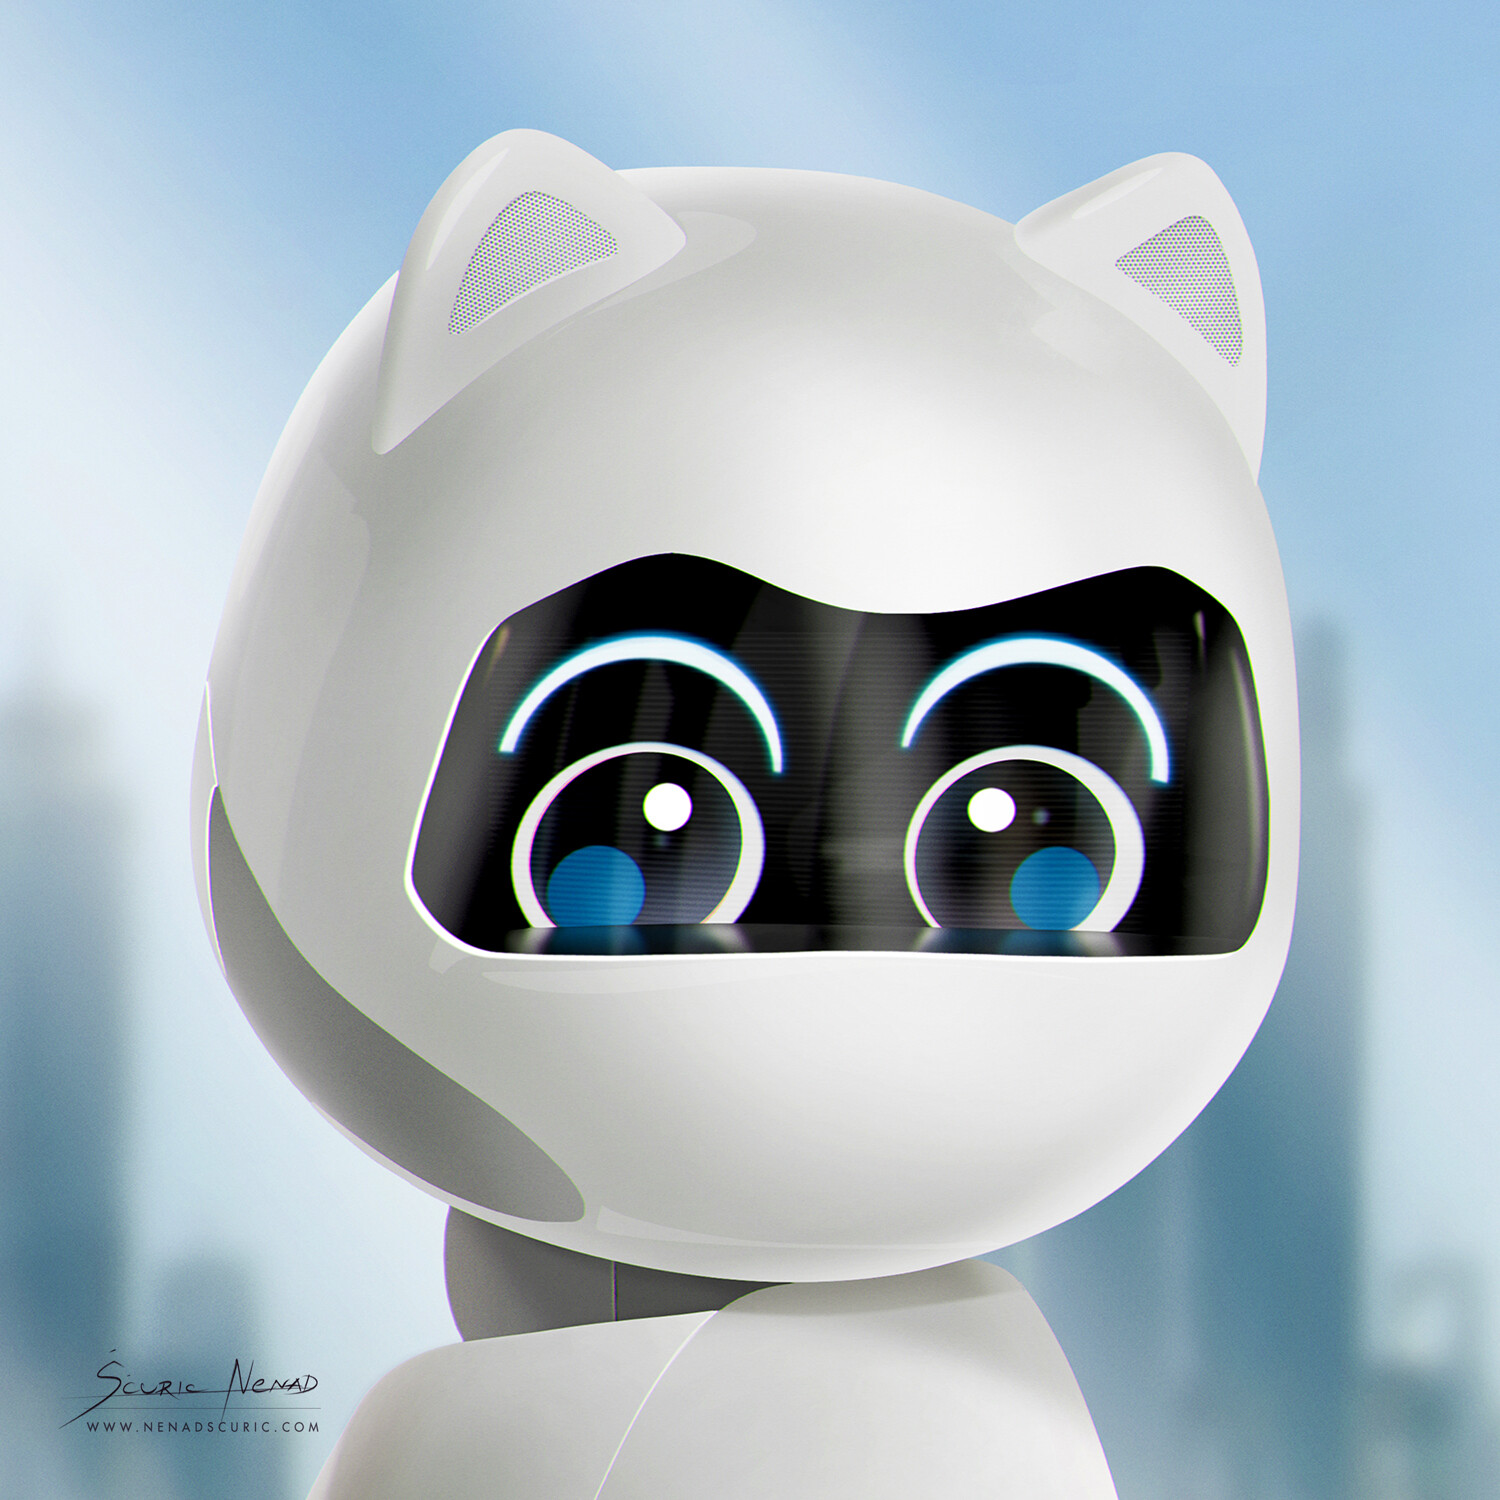 ArtStation - Kiki the robot fully 2D painted with Photoshop (vector shapes +brushwork).